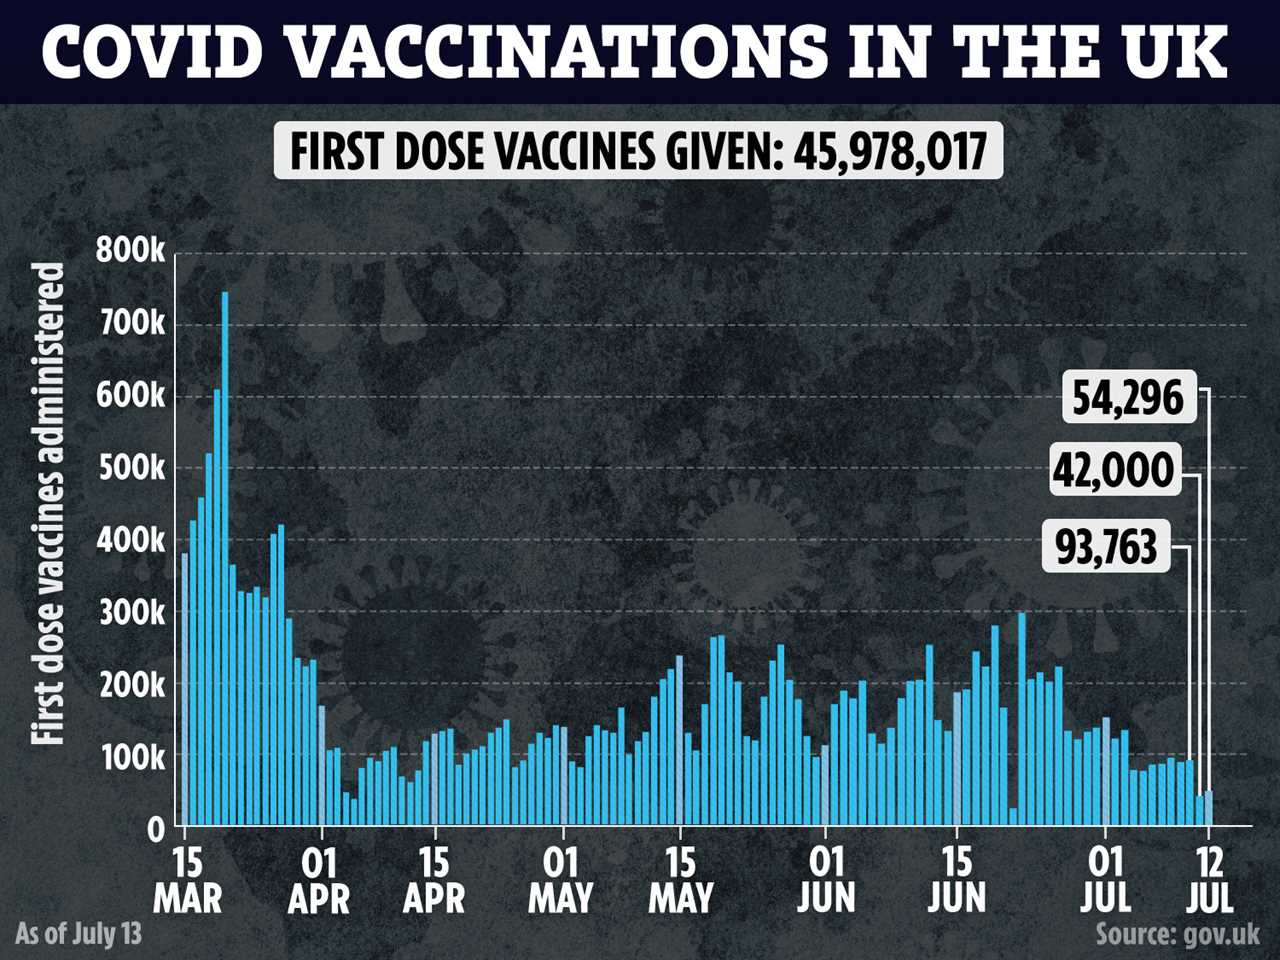 1,200 scientists call for lockdown REVERSAL ahead of ‘Freedom Day’ despite 81 MILLION vaccine doses being administered